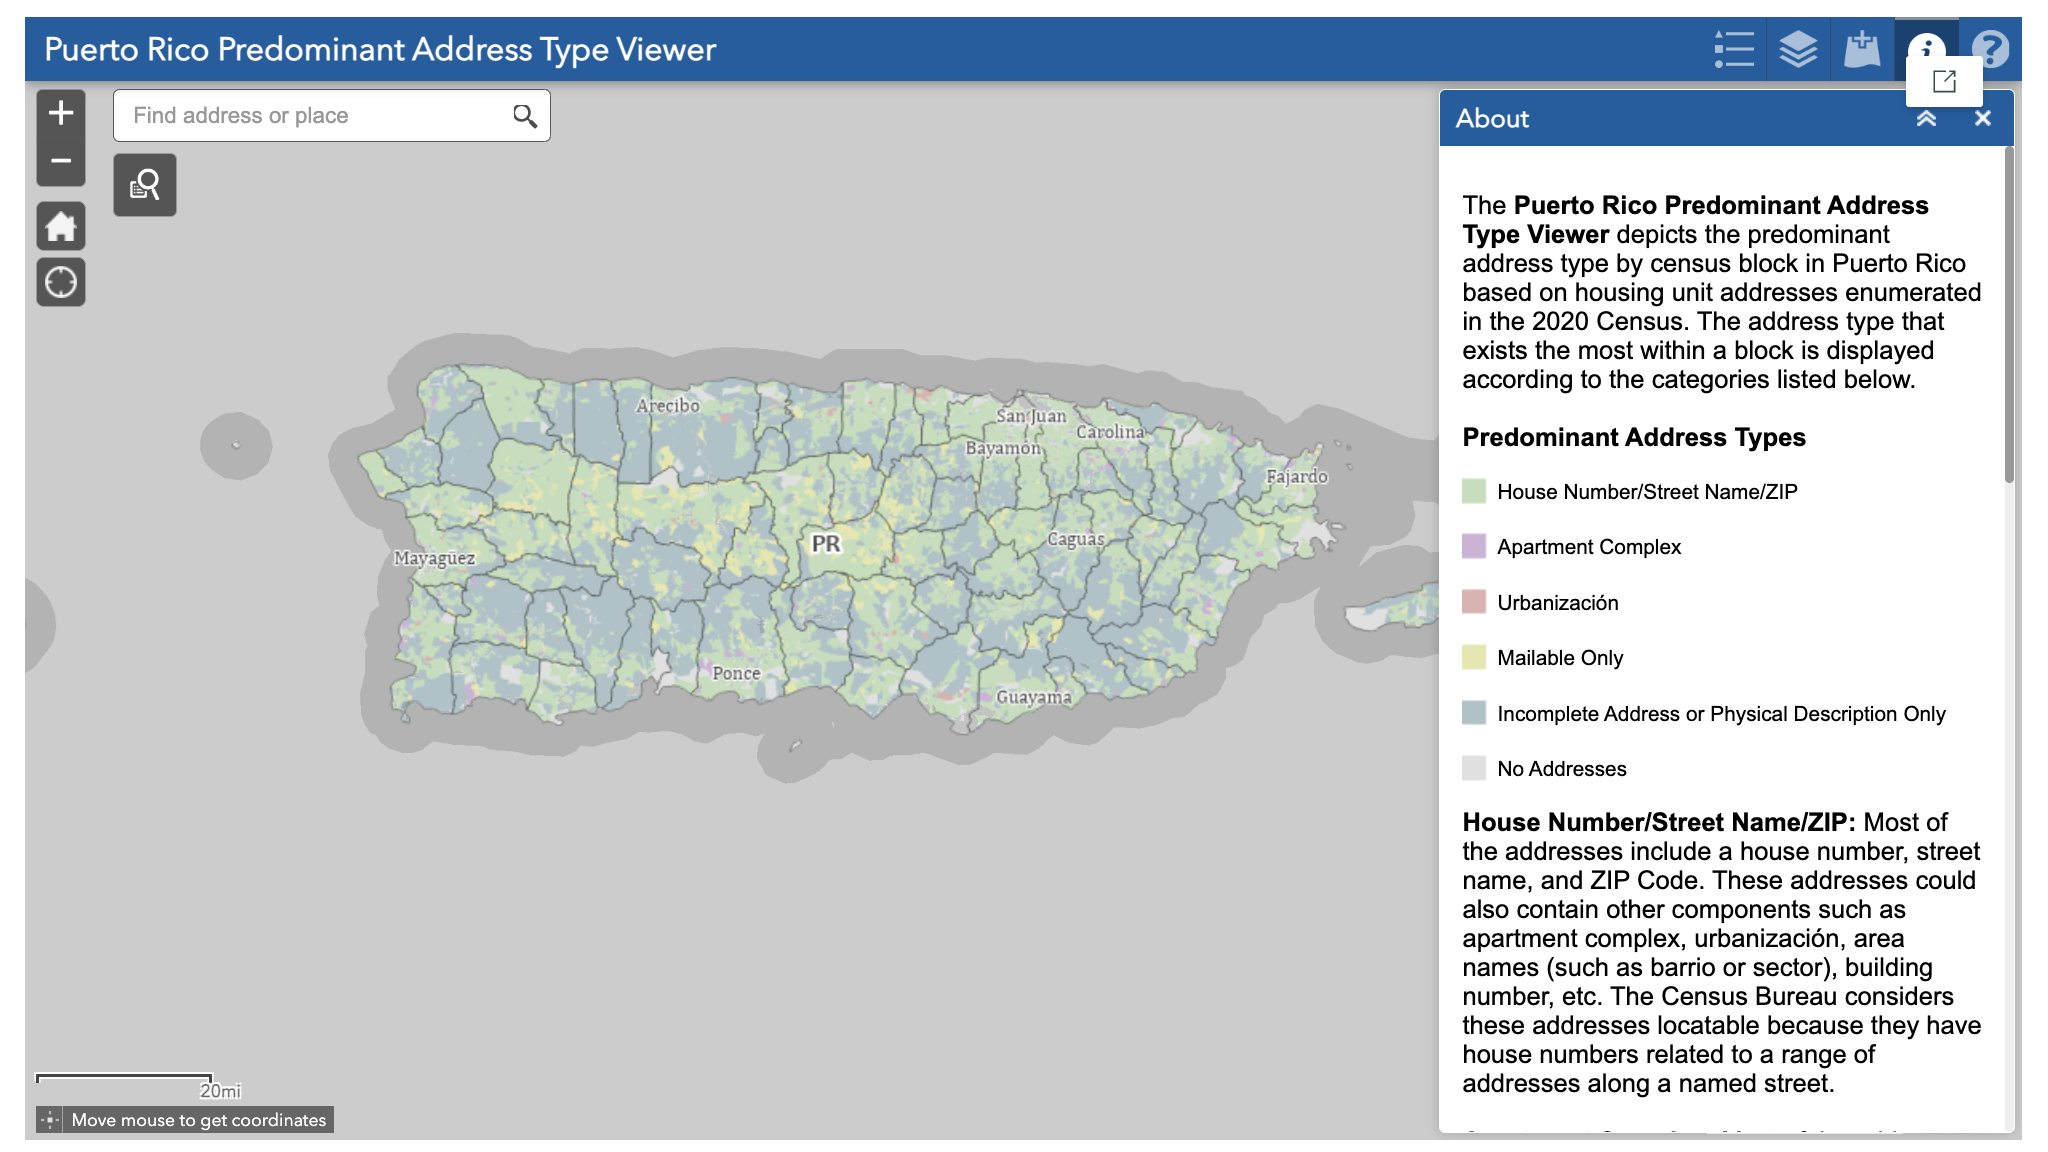 An image showing an ArcGIS dashboard of a map of Puerto Rico